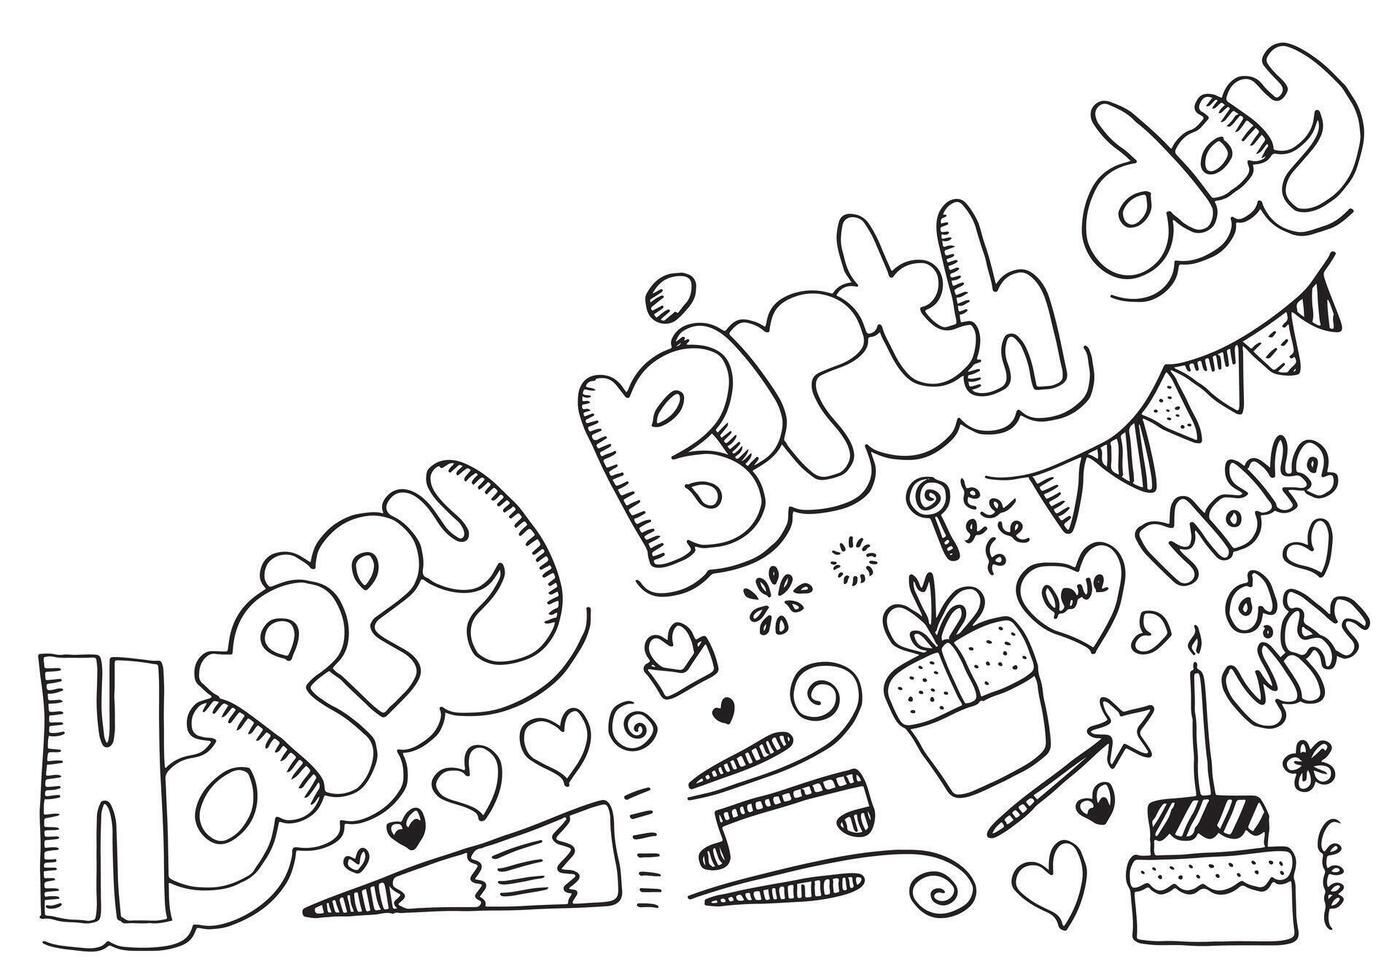 collection of hand drawn doodle cartoon objects and symbols on birthday party for banners and invitation cards. vector